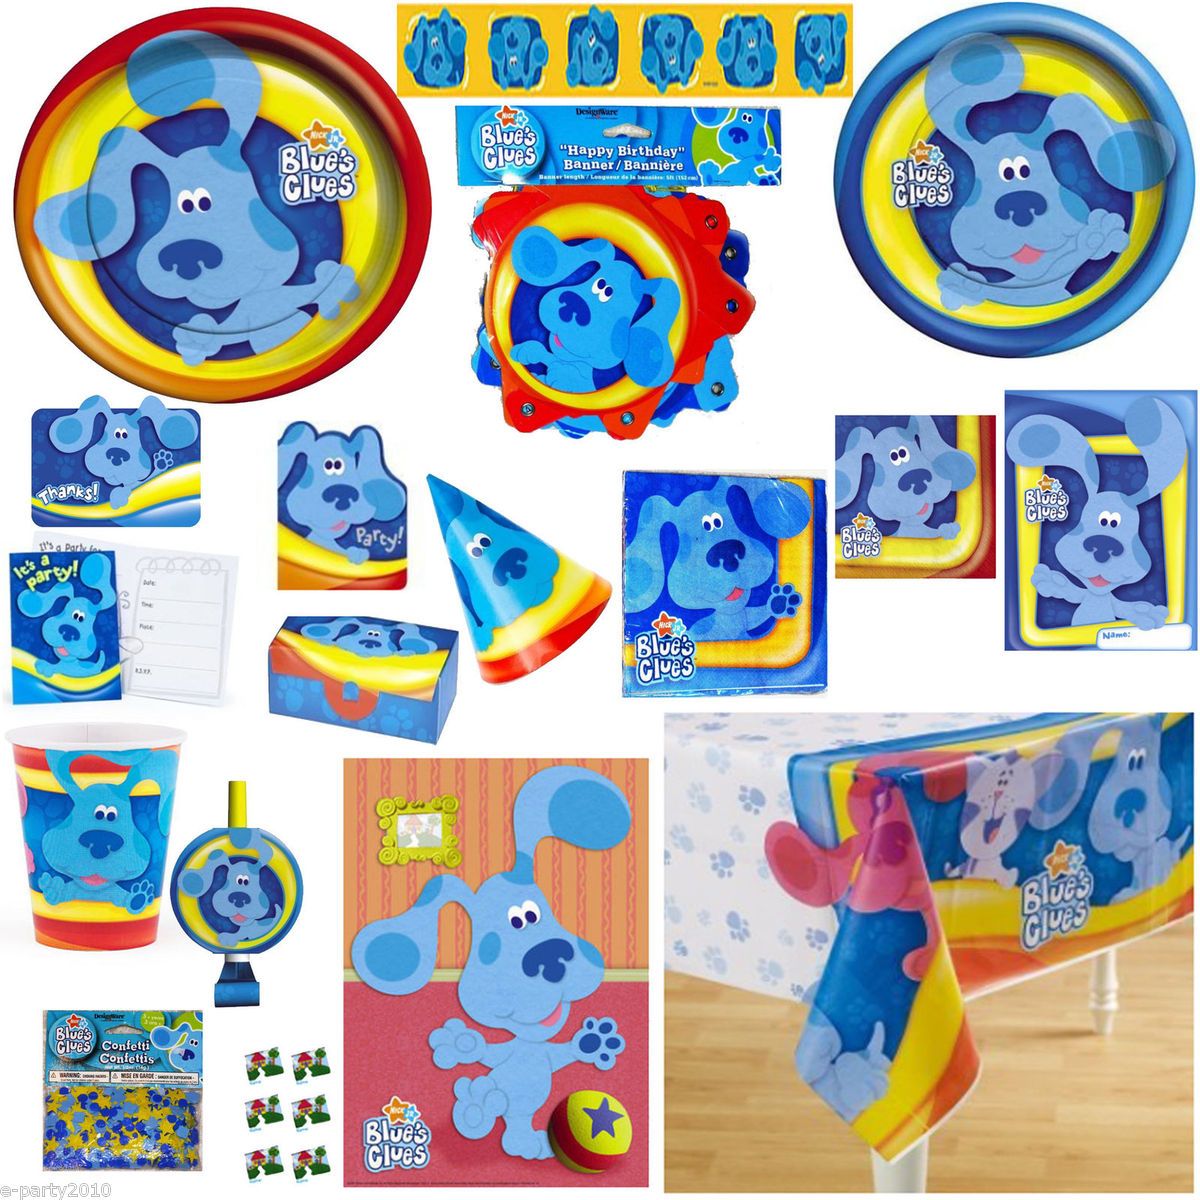 Vintage Blues Clues Birthday Party Supplies Pick 1 or Many to Create 